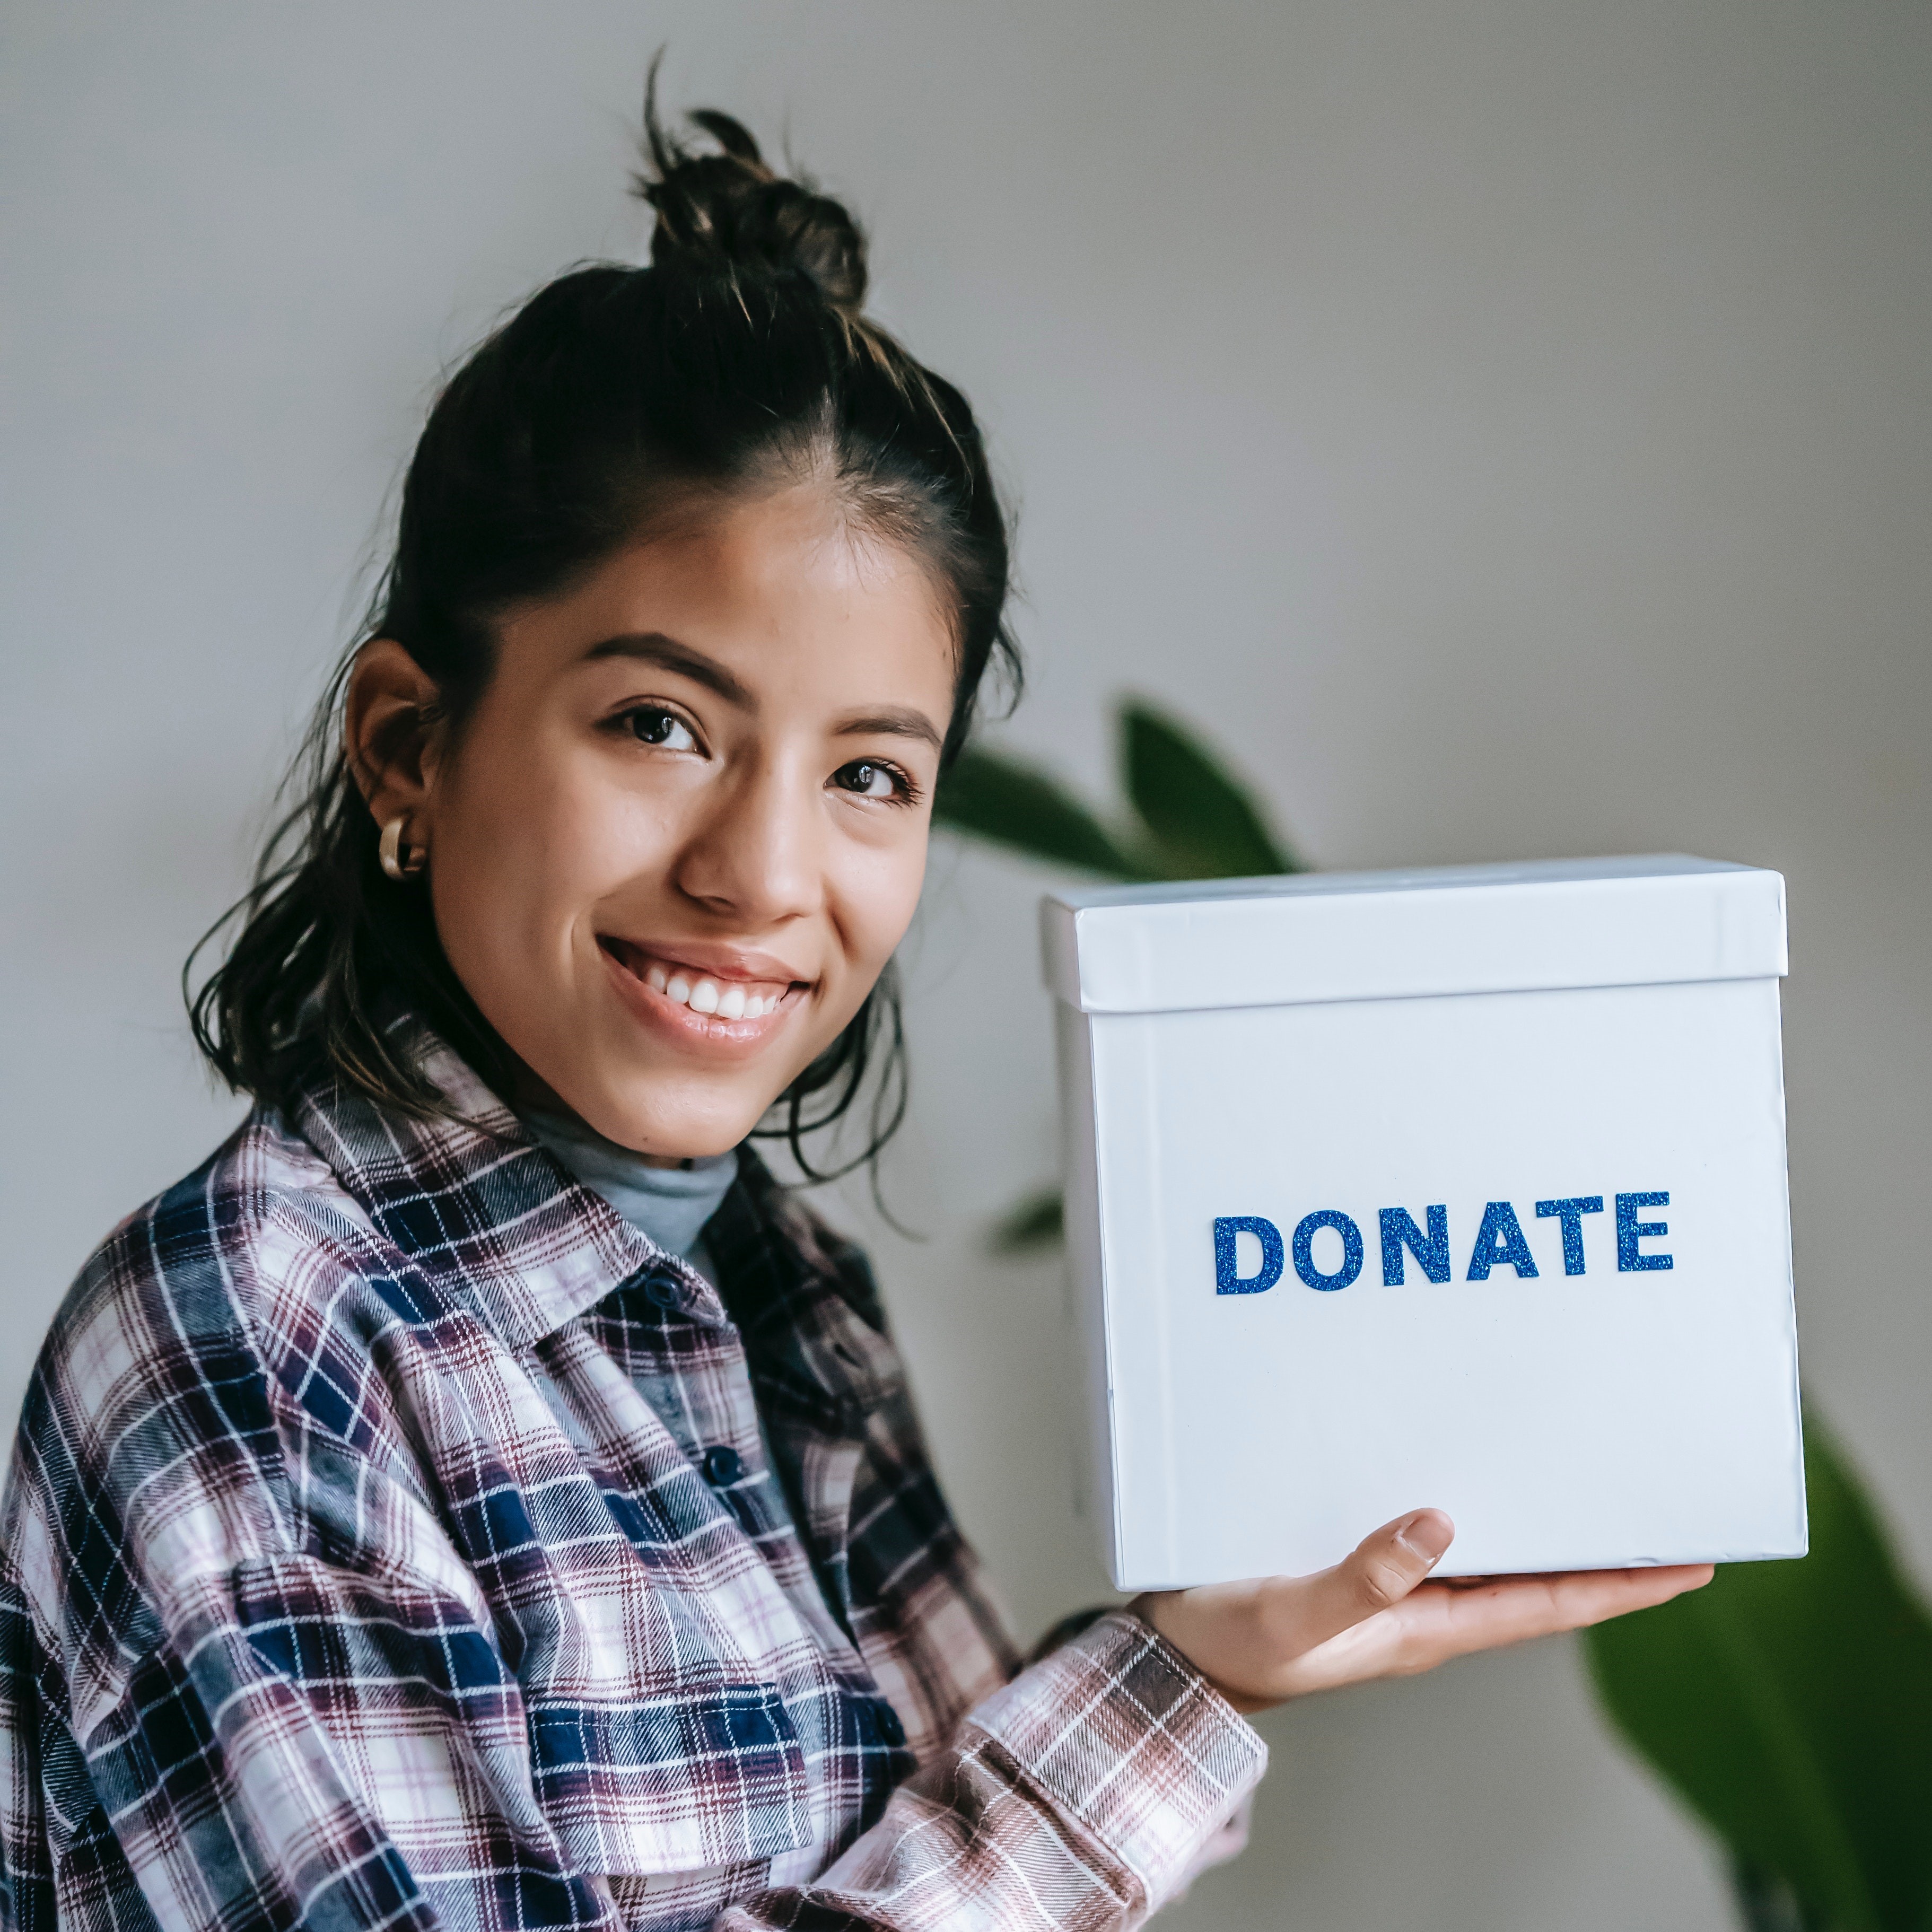 A person holding the box that says "Donate"